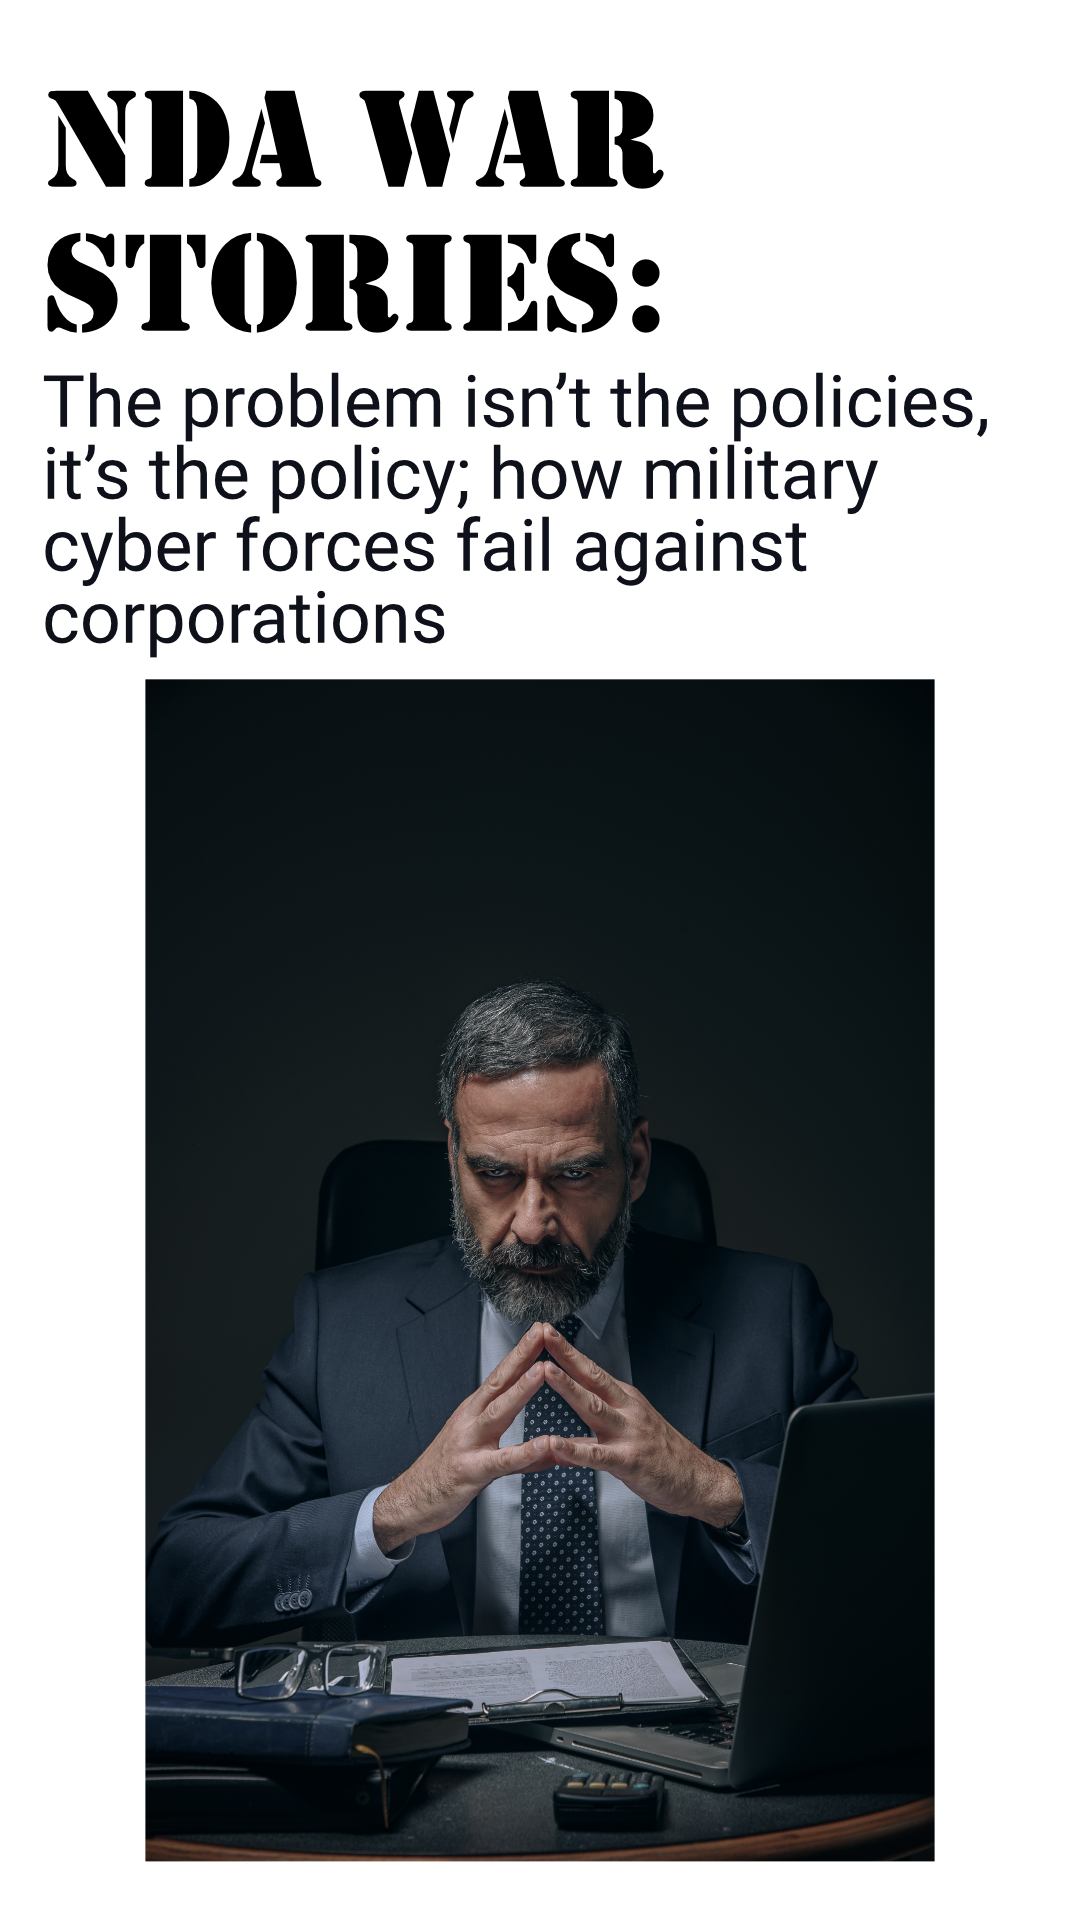 Evil business person glares directly over a desk with a laptop. The scowl of the man intesifies with a piercing gaze as he rests his elbows over the desk while arching his fingers together in sign of superiority.